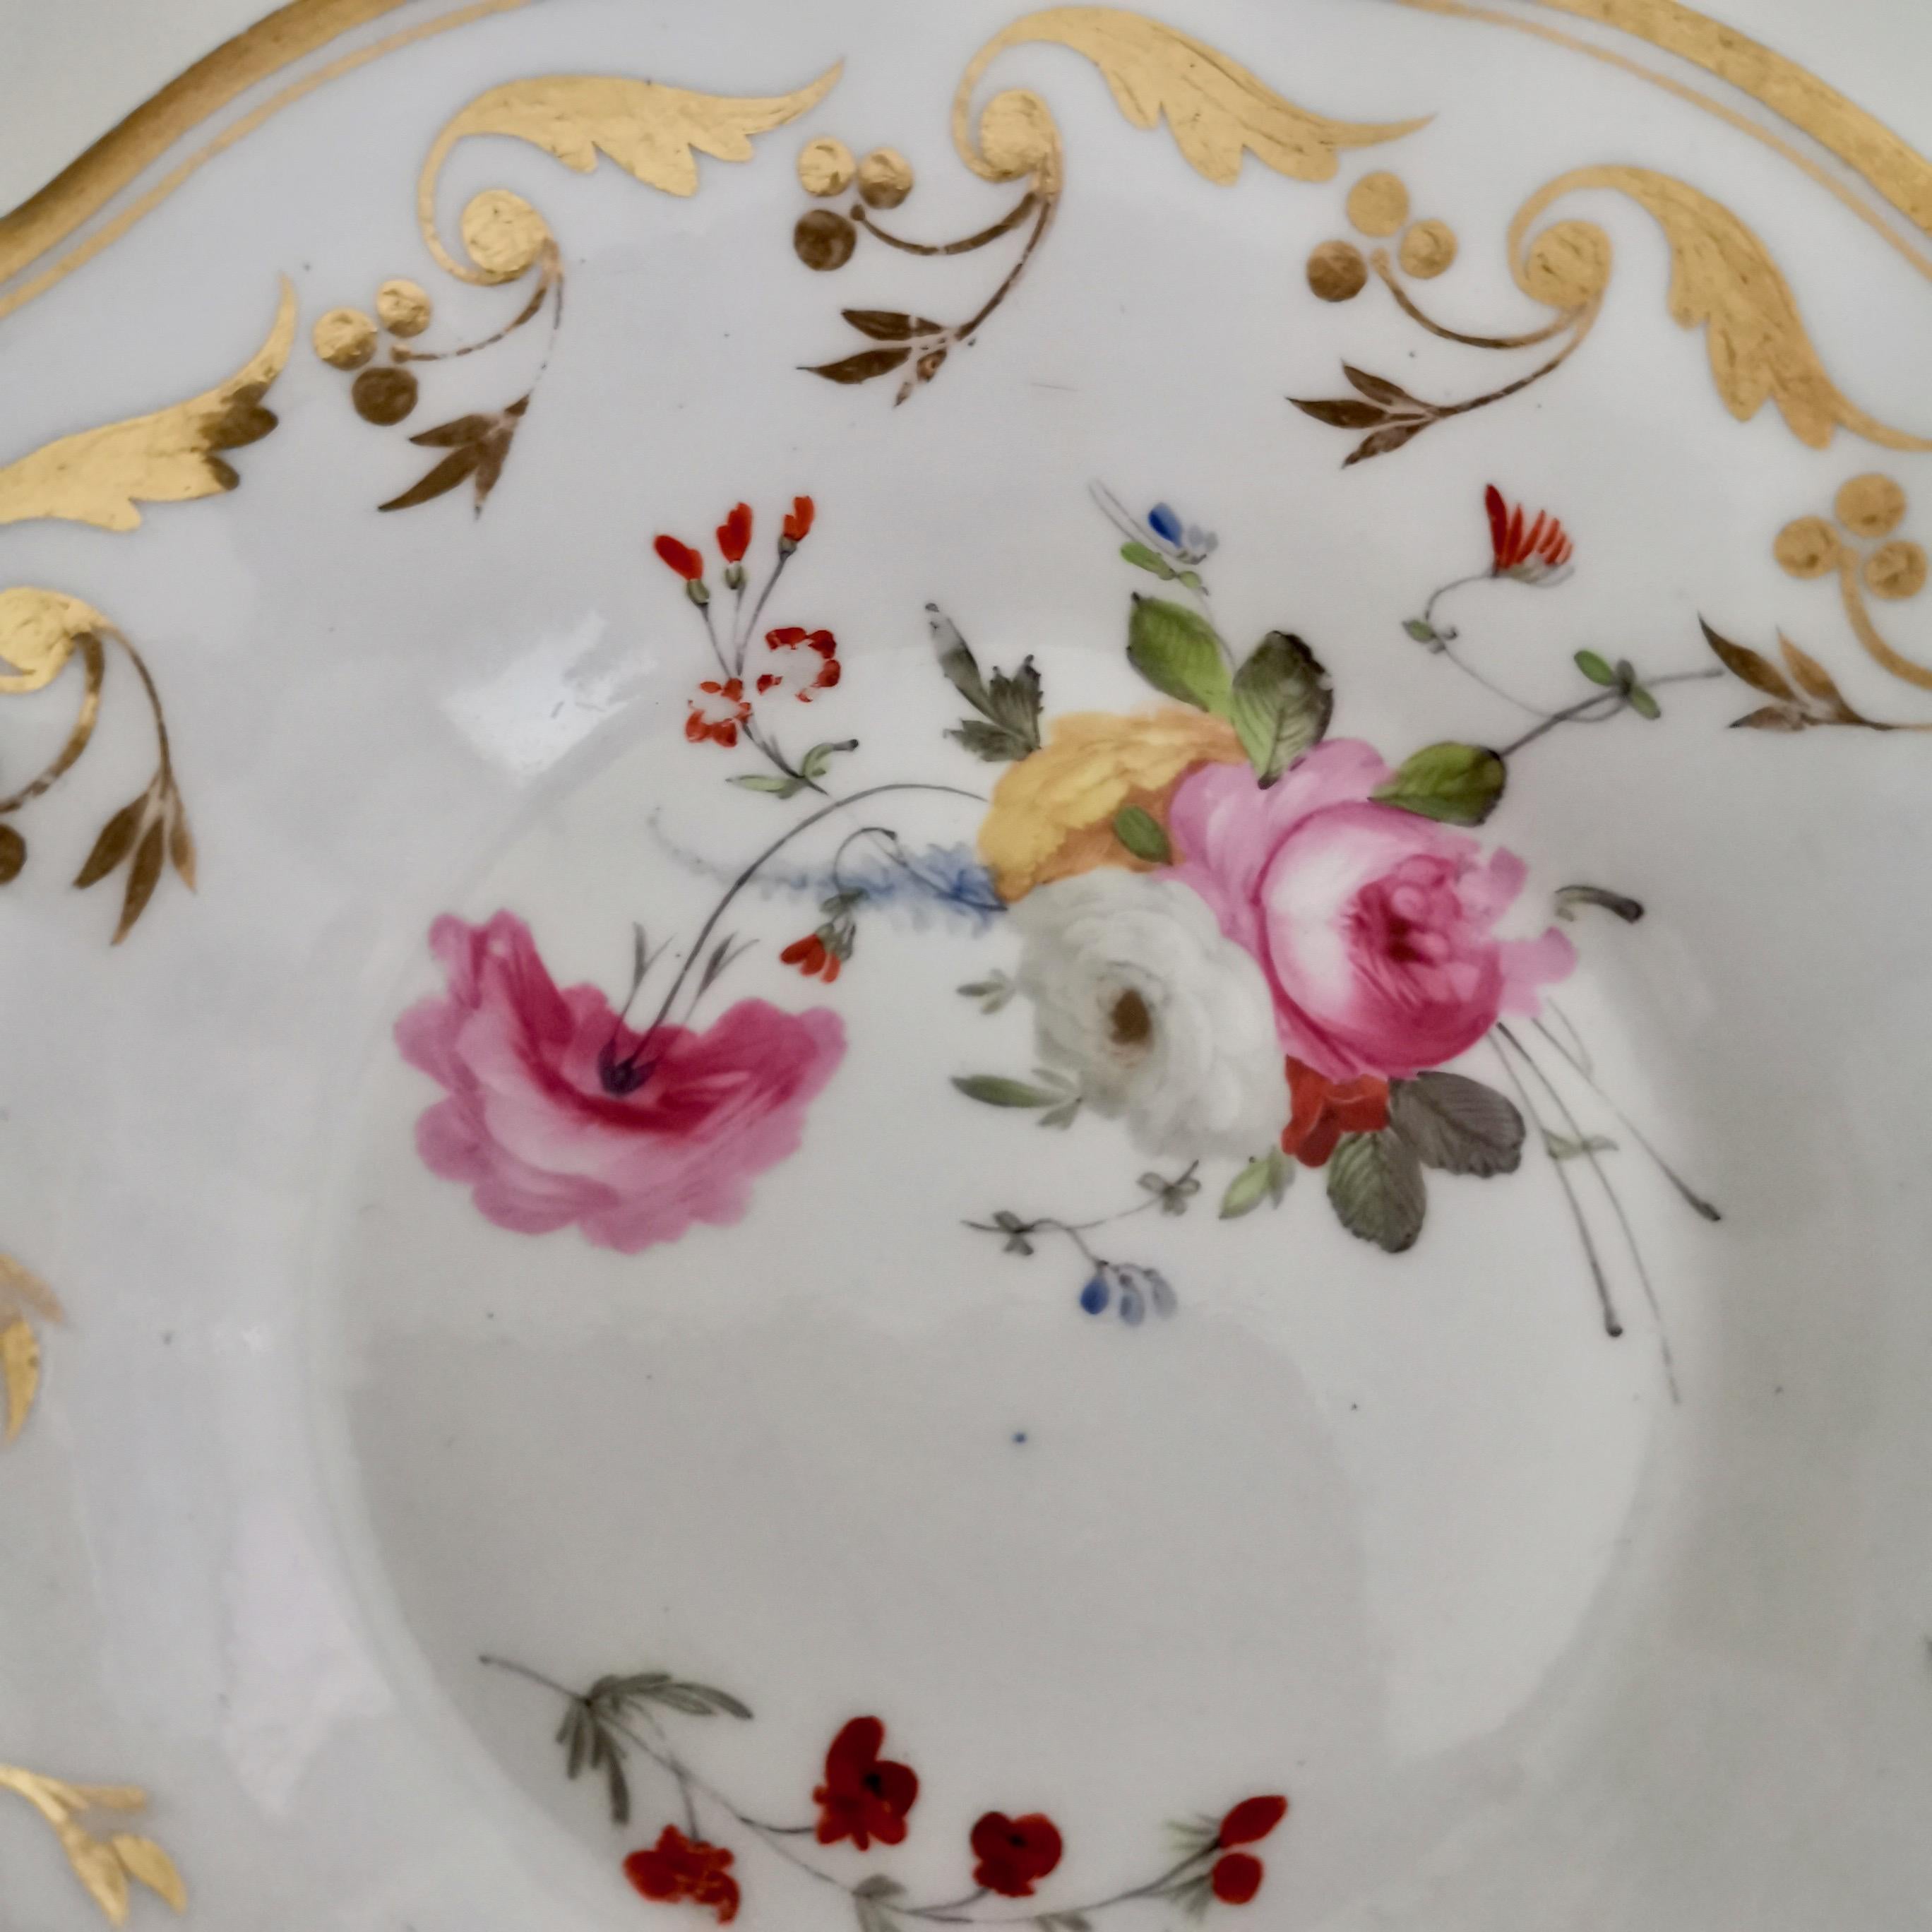 Early 19th Century Yates Porcelain Teacup, White with Gilt and Flowers, Regency, circa 1825